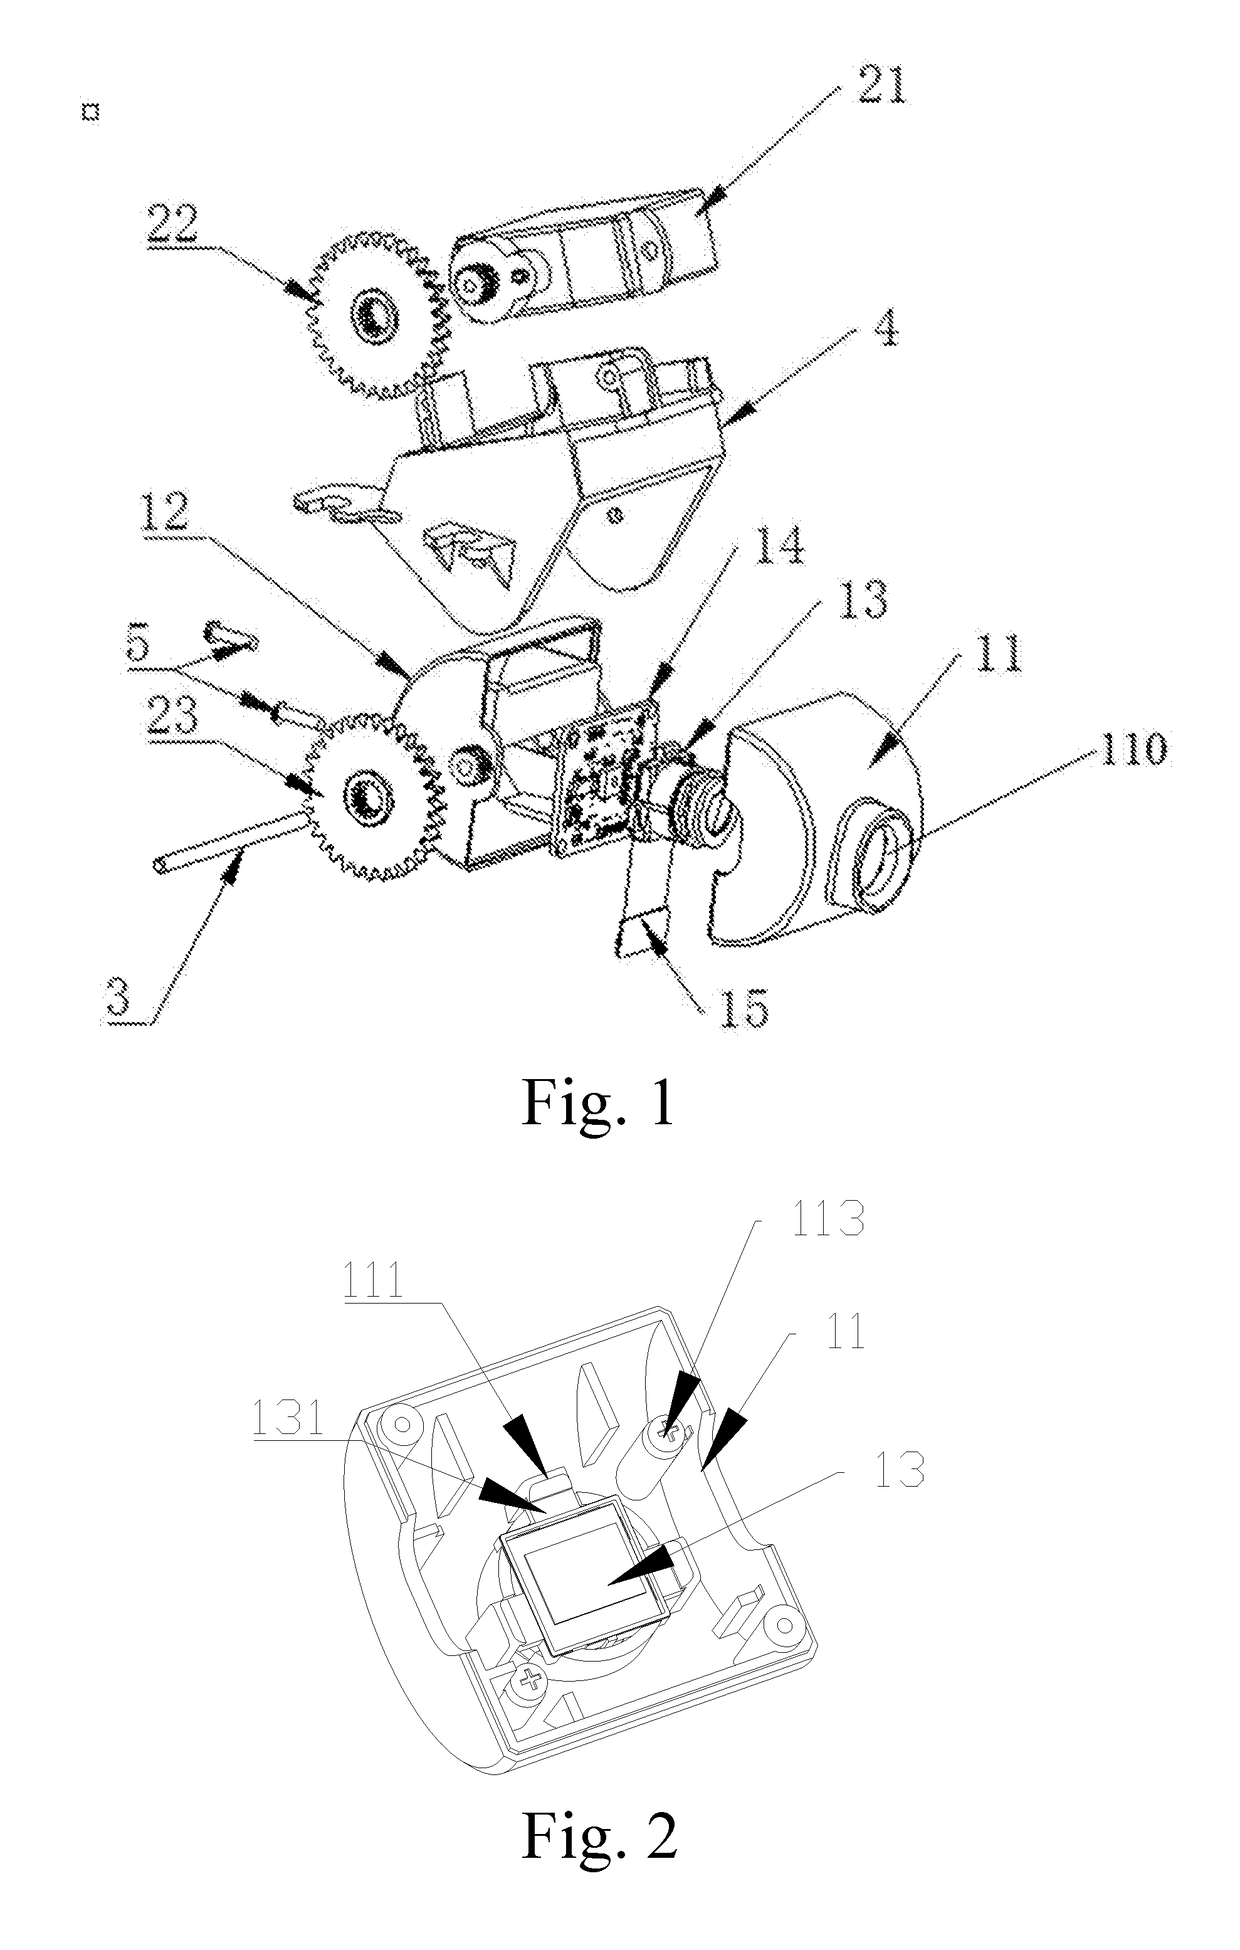 Single-shaft lens device for unmanned aerial vehicles